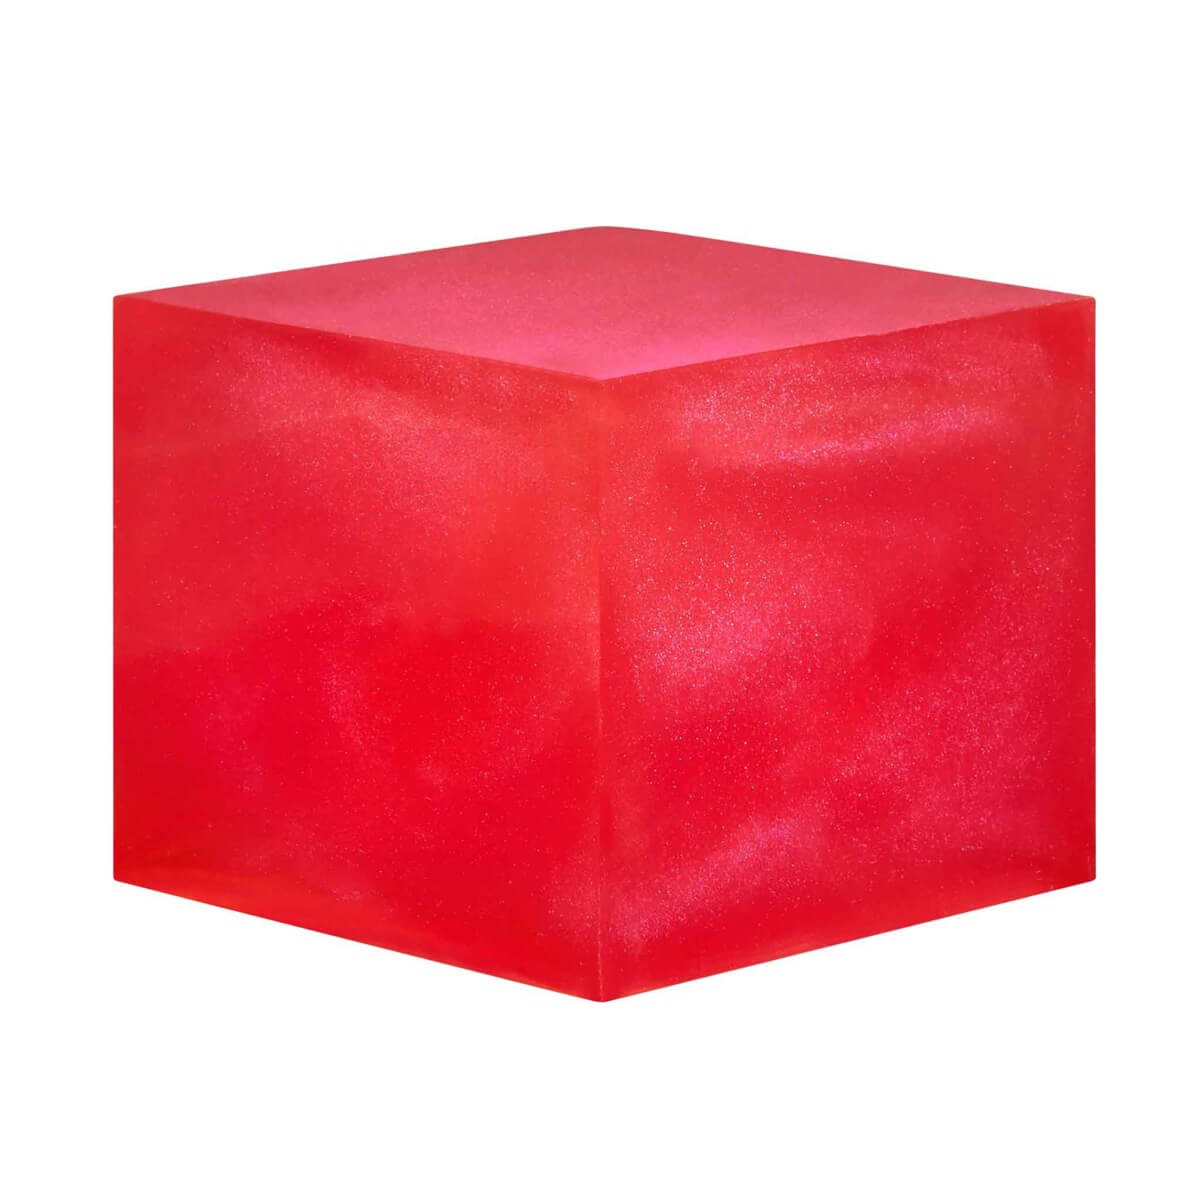 A resin cube made with the Magical Magenta Mica Powder Pigment by Pigmently.